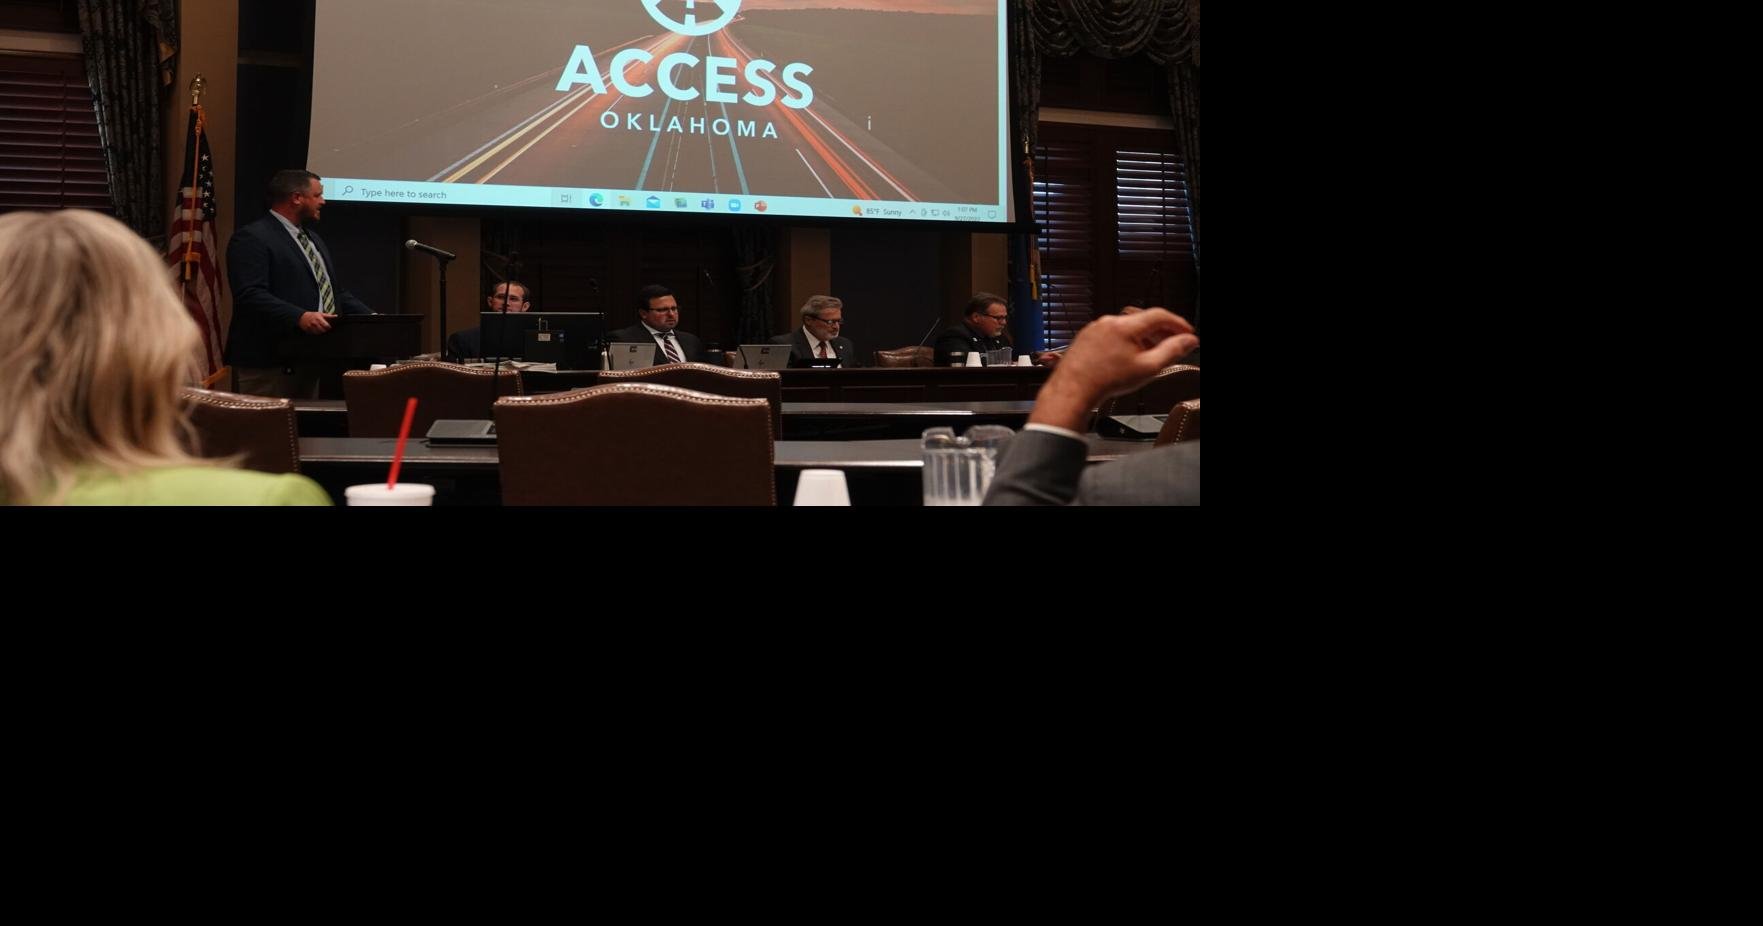 ACCESS Oklahoma on pause after violation of Open Meeting Act